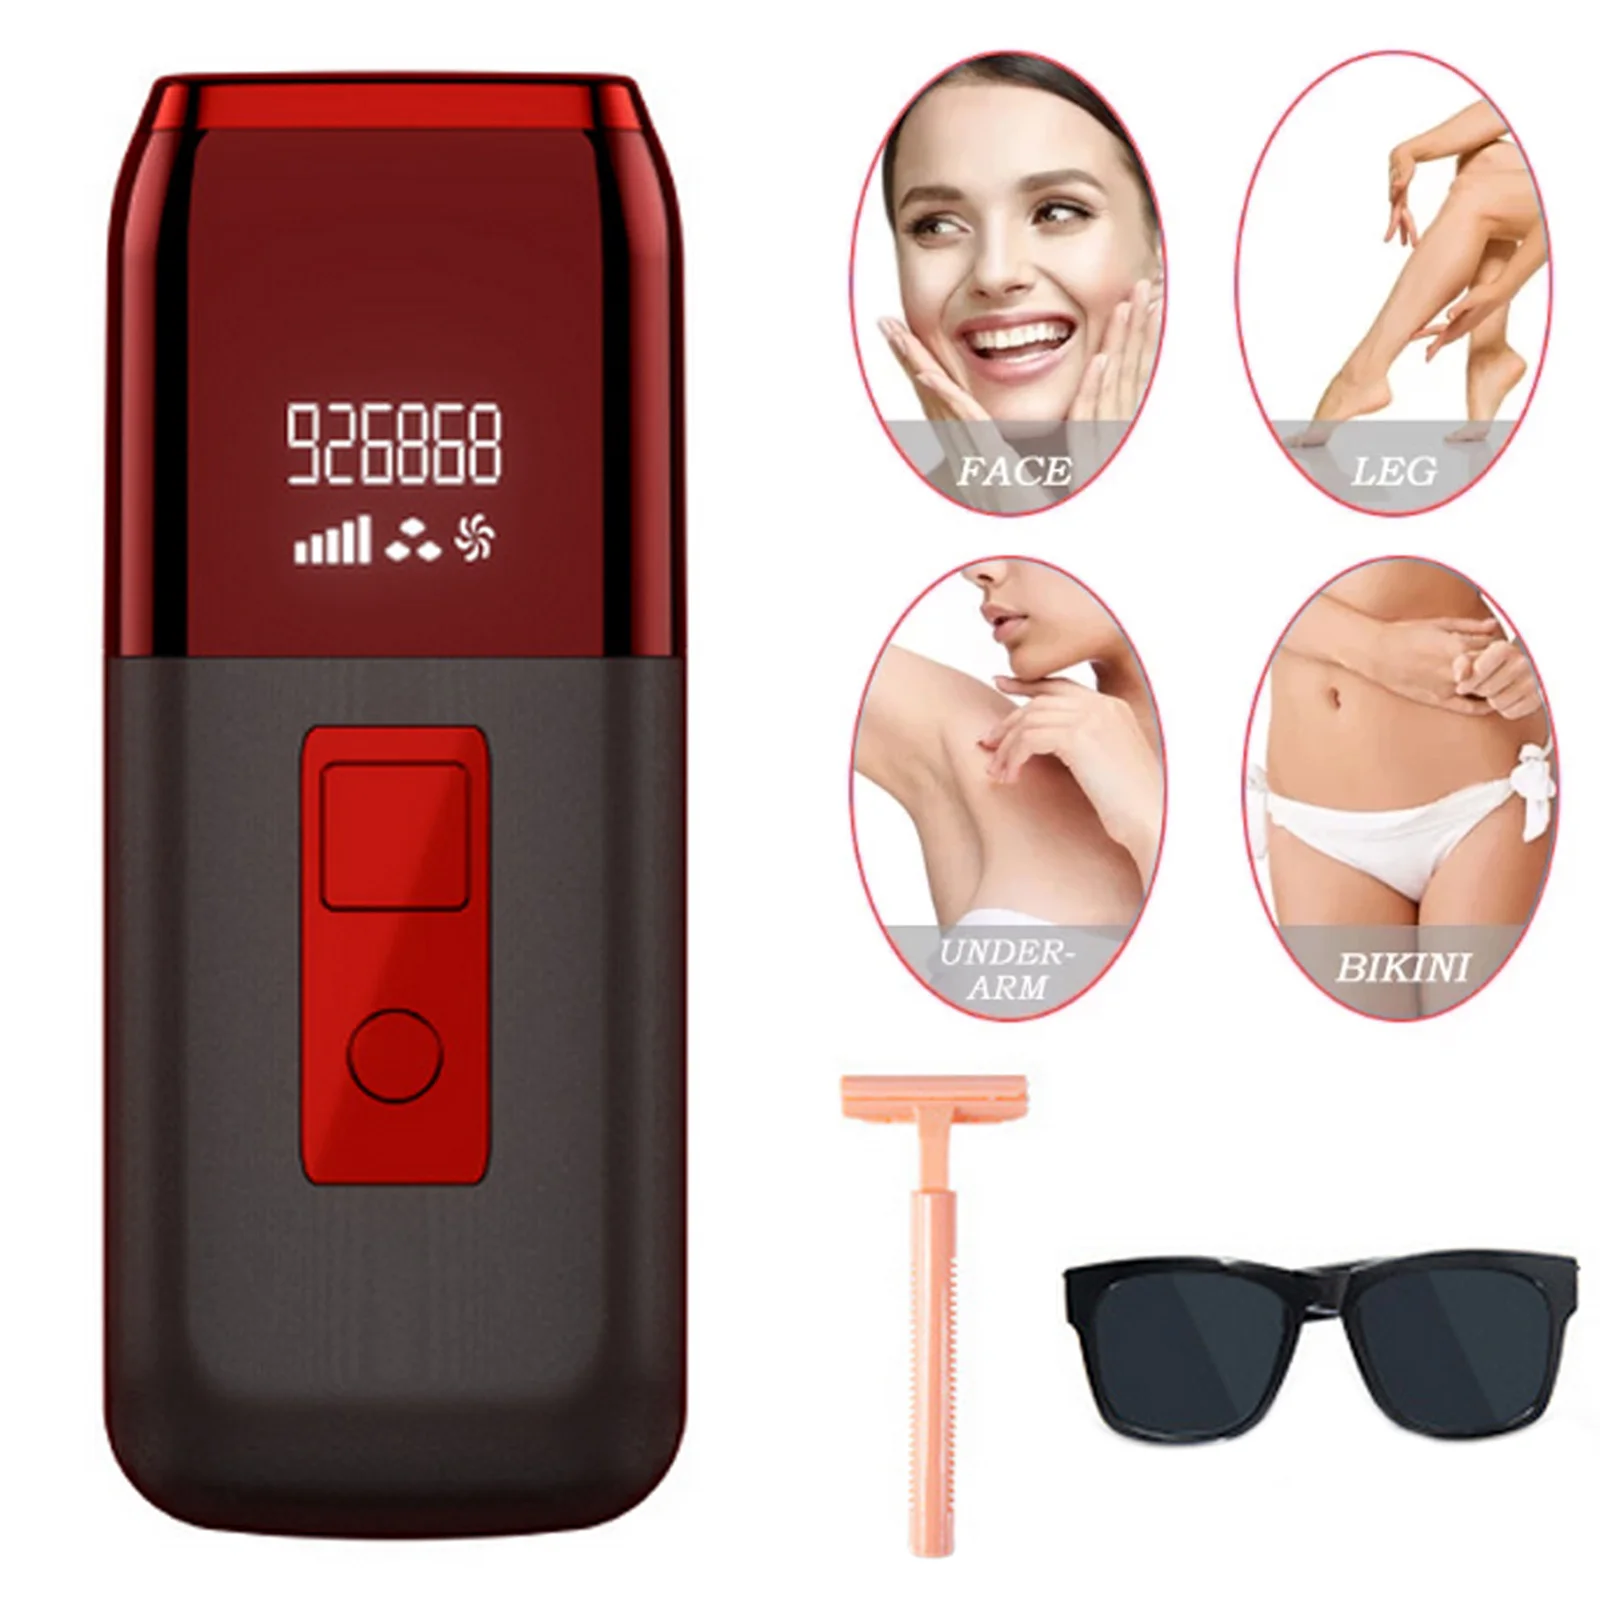 Hair Remover Portable Painless 1000000 Flashes IPL Hair Removal Device Machine with Shaver Goggles Whole Body Home Use EU Plug low price jj 877 unisex classic manual double edged razor body hair removal blade beard trimmer shaver with travel case